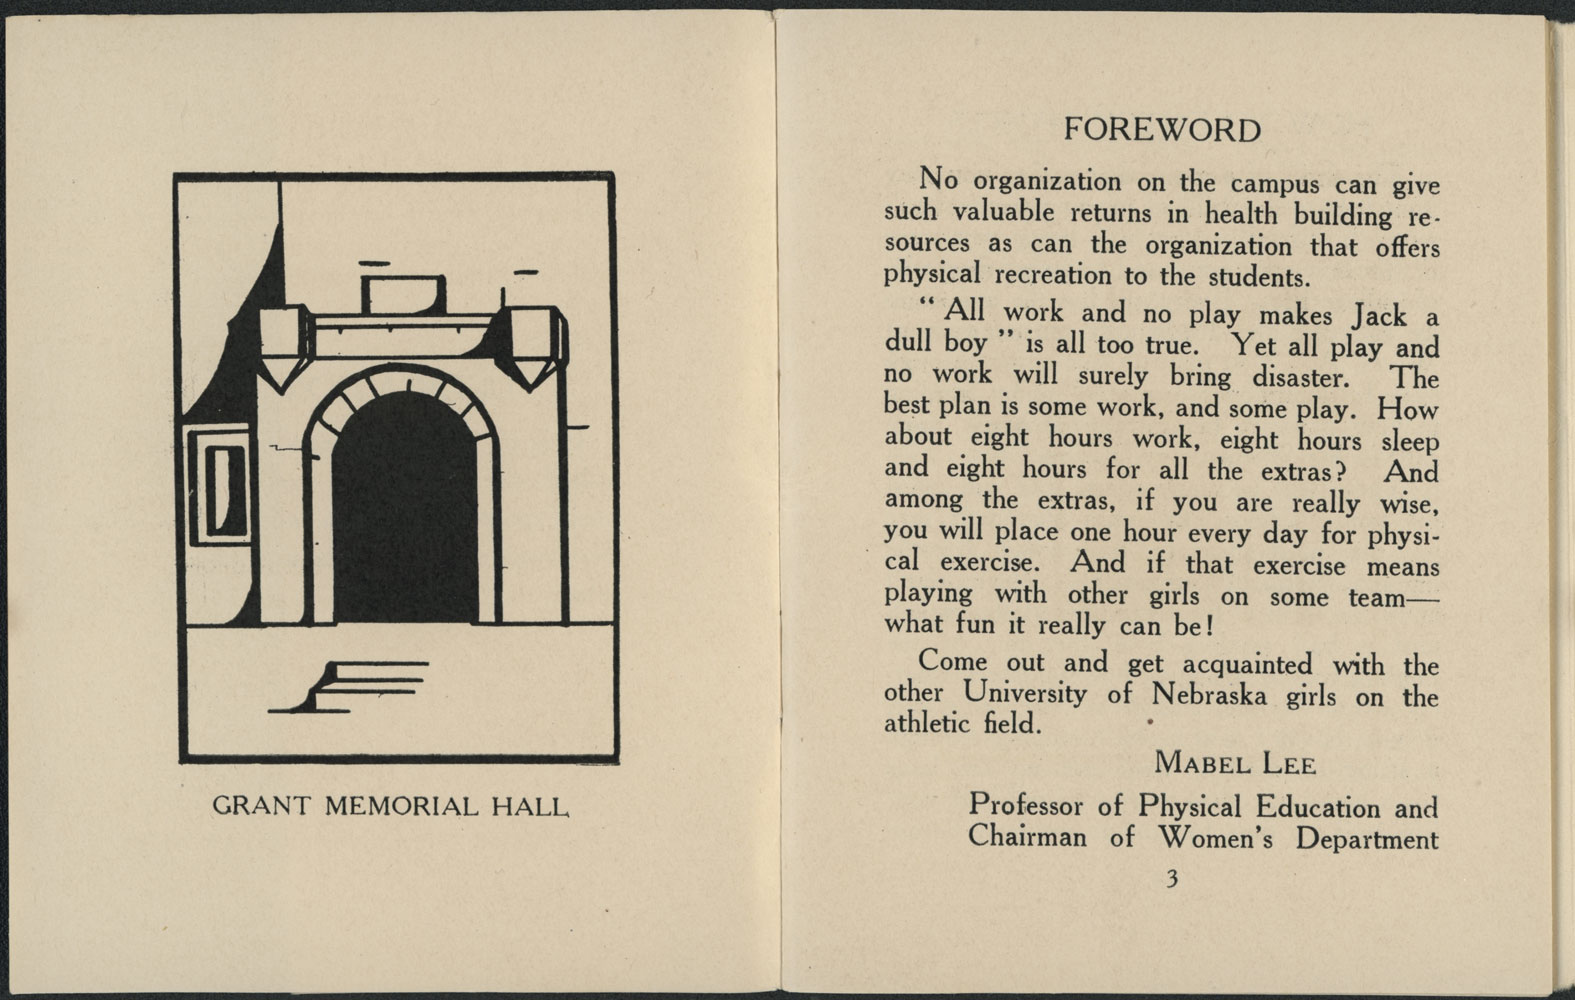 A drawn depiction of Grant Memorial Hall and a typed foreword